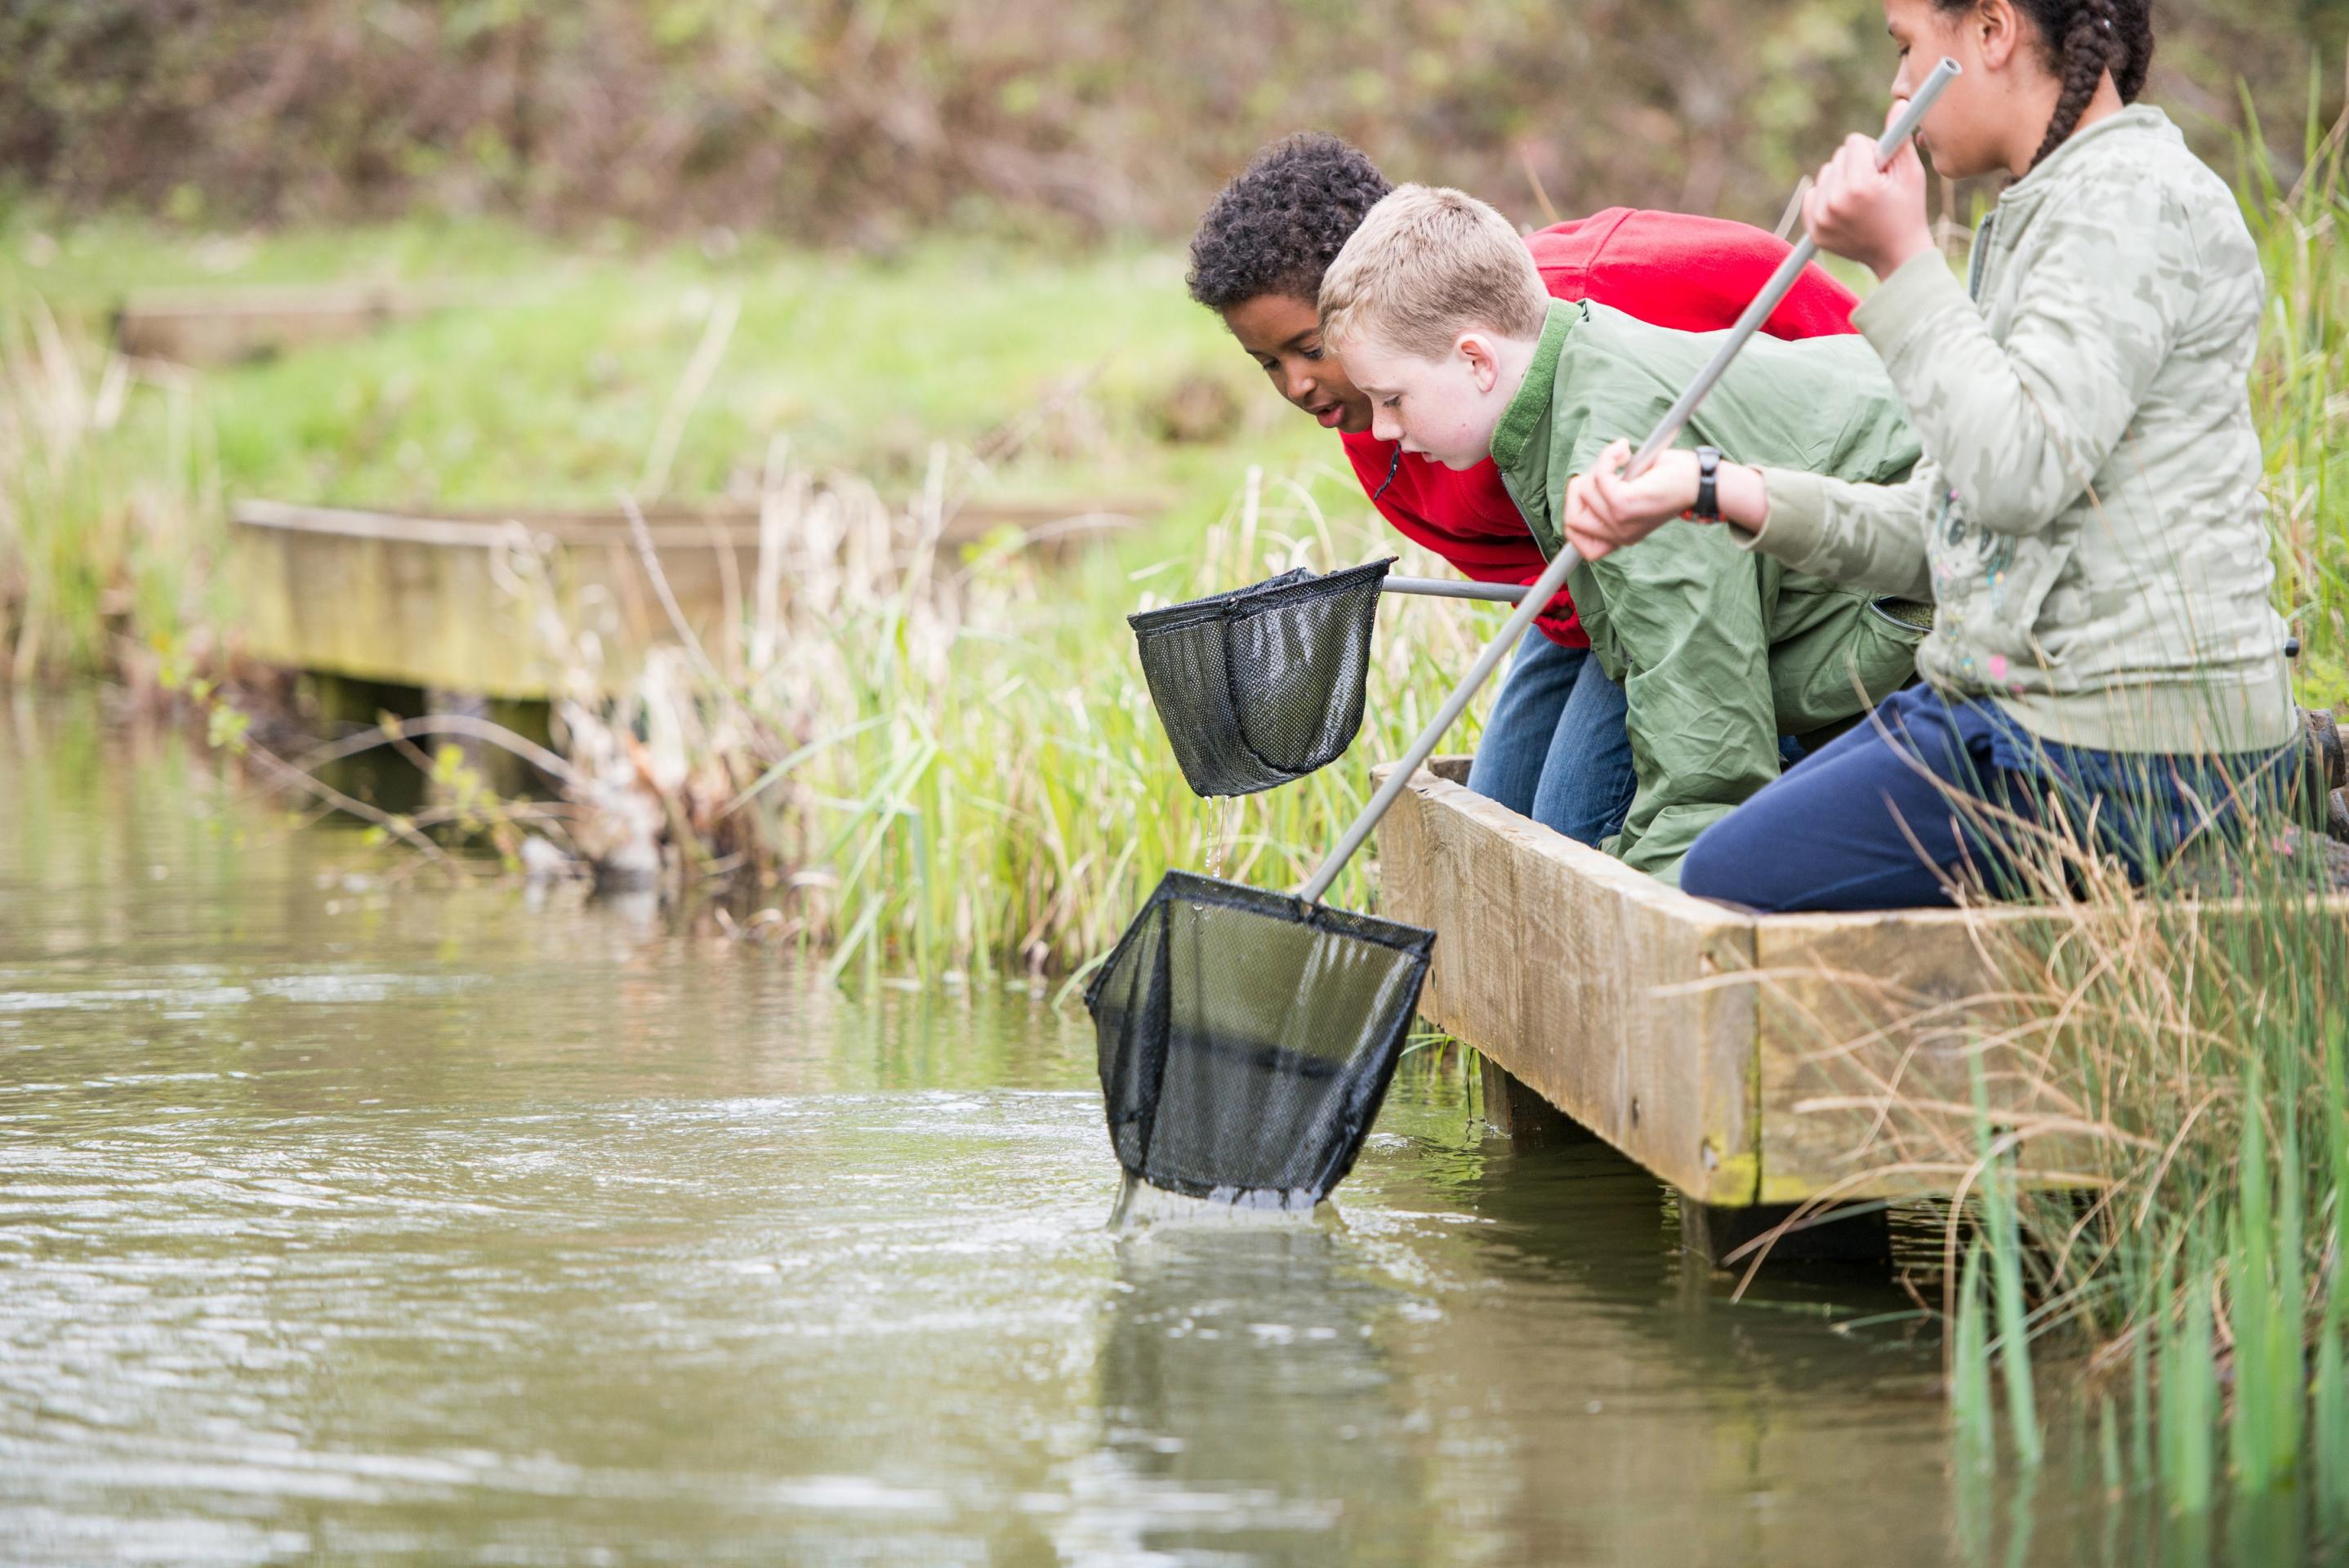 Pond dipping activity